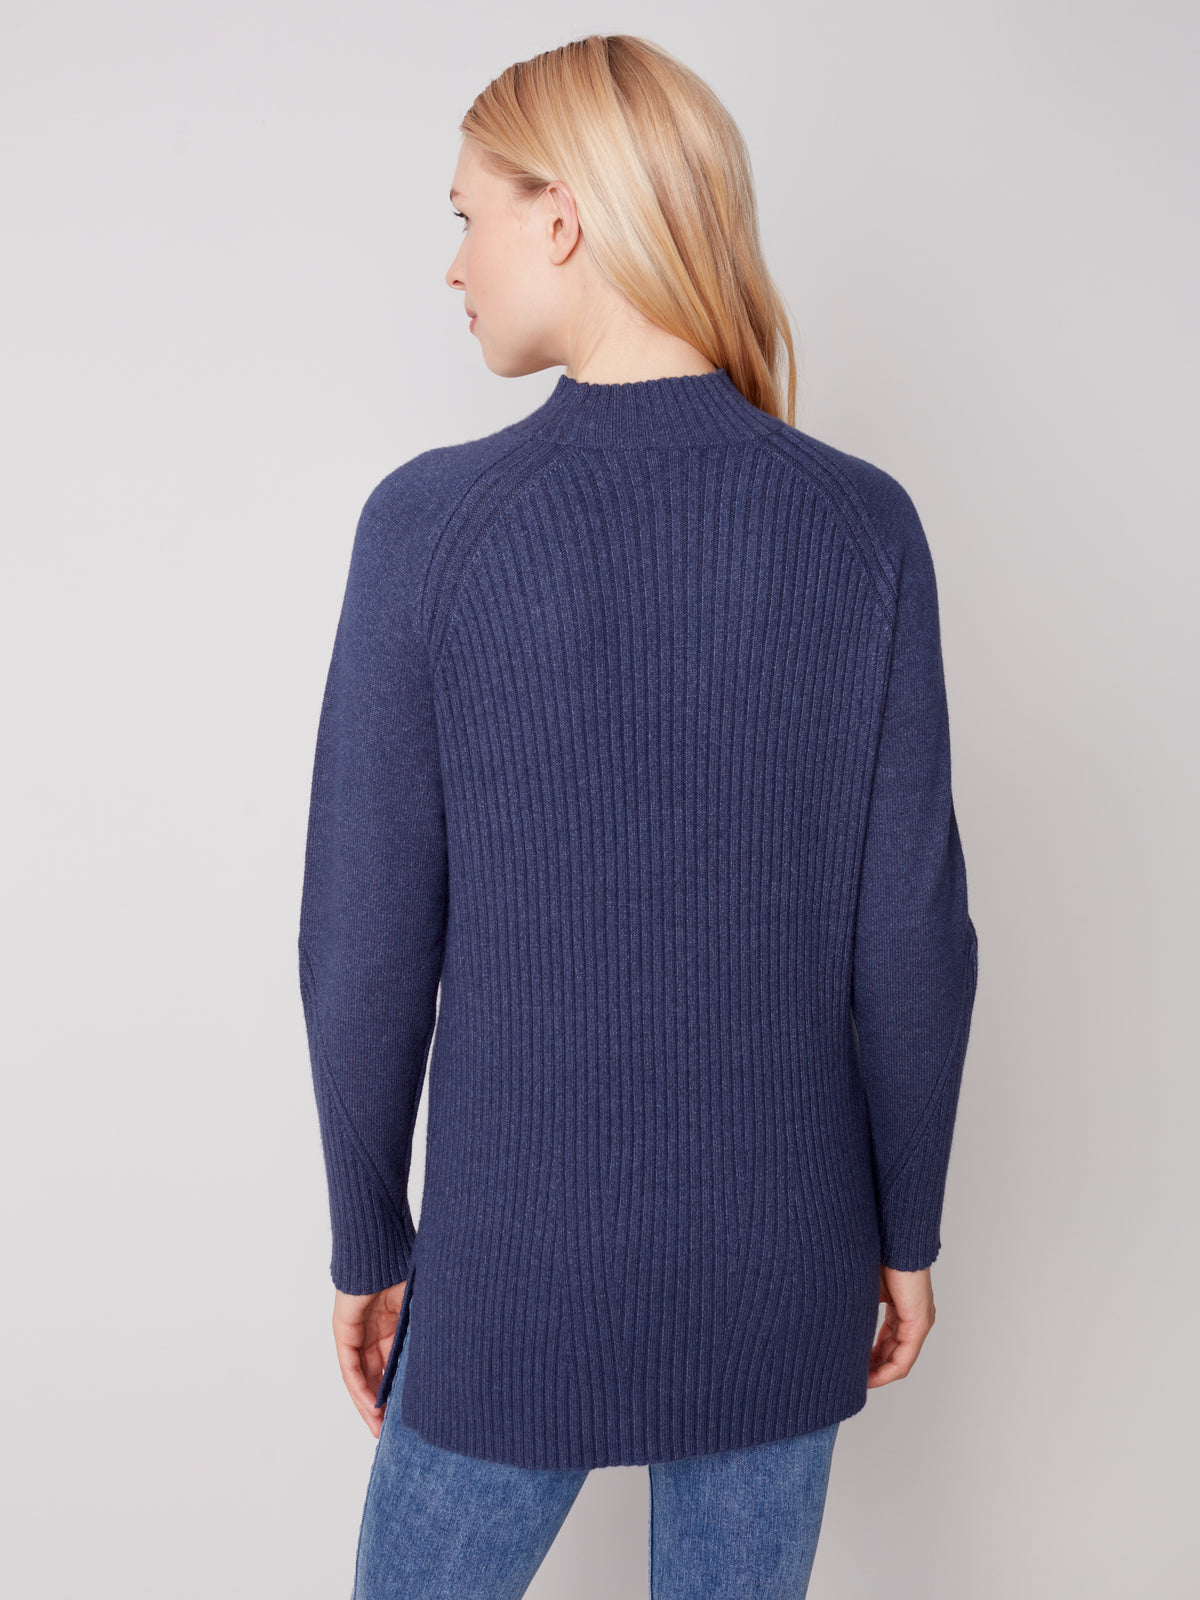 The Danielle Sweater-Navy